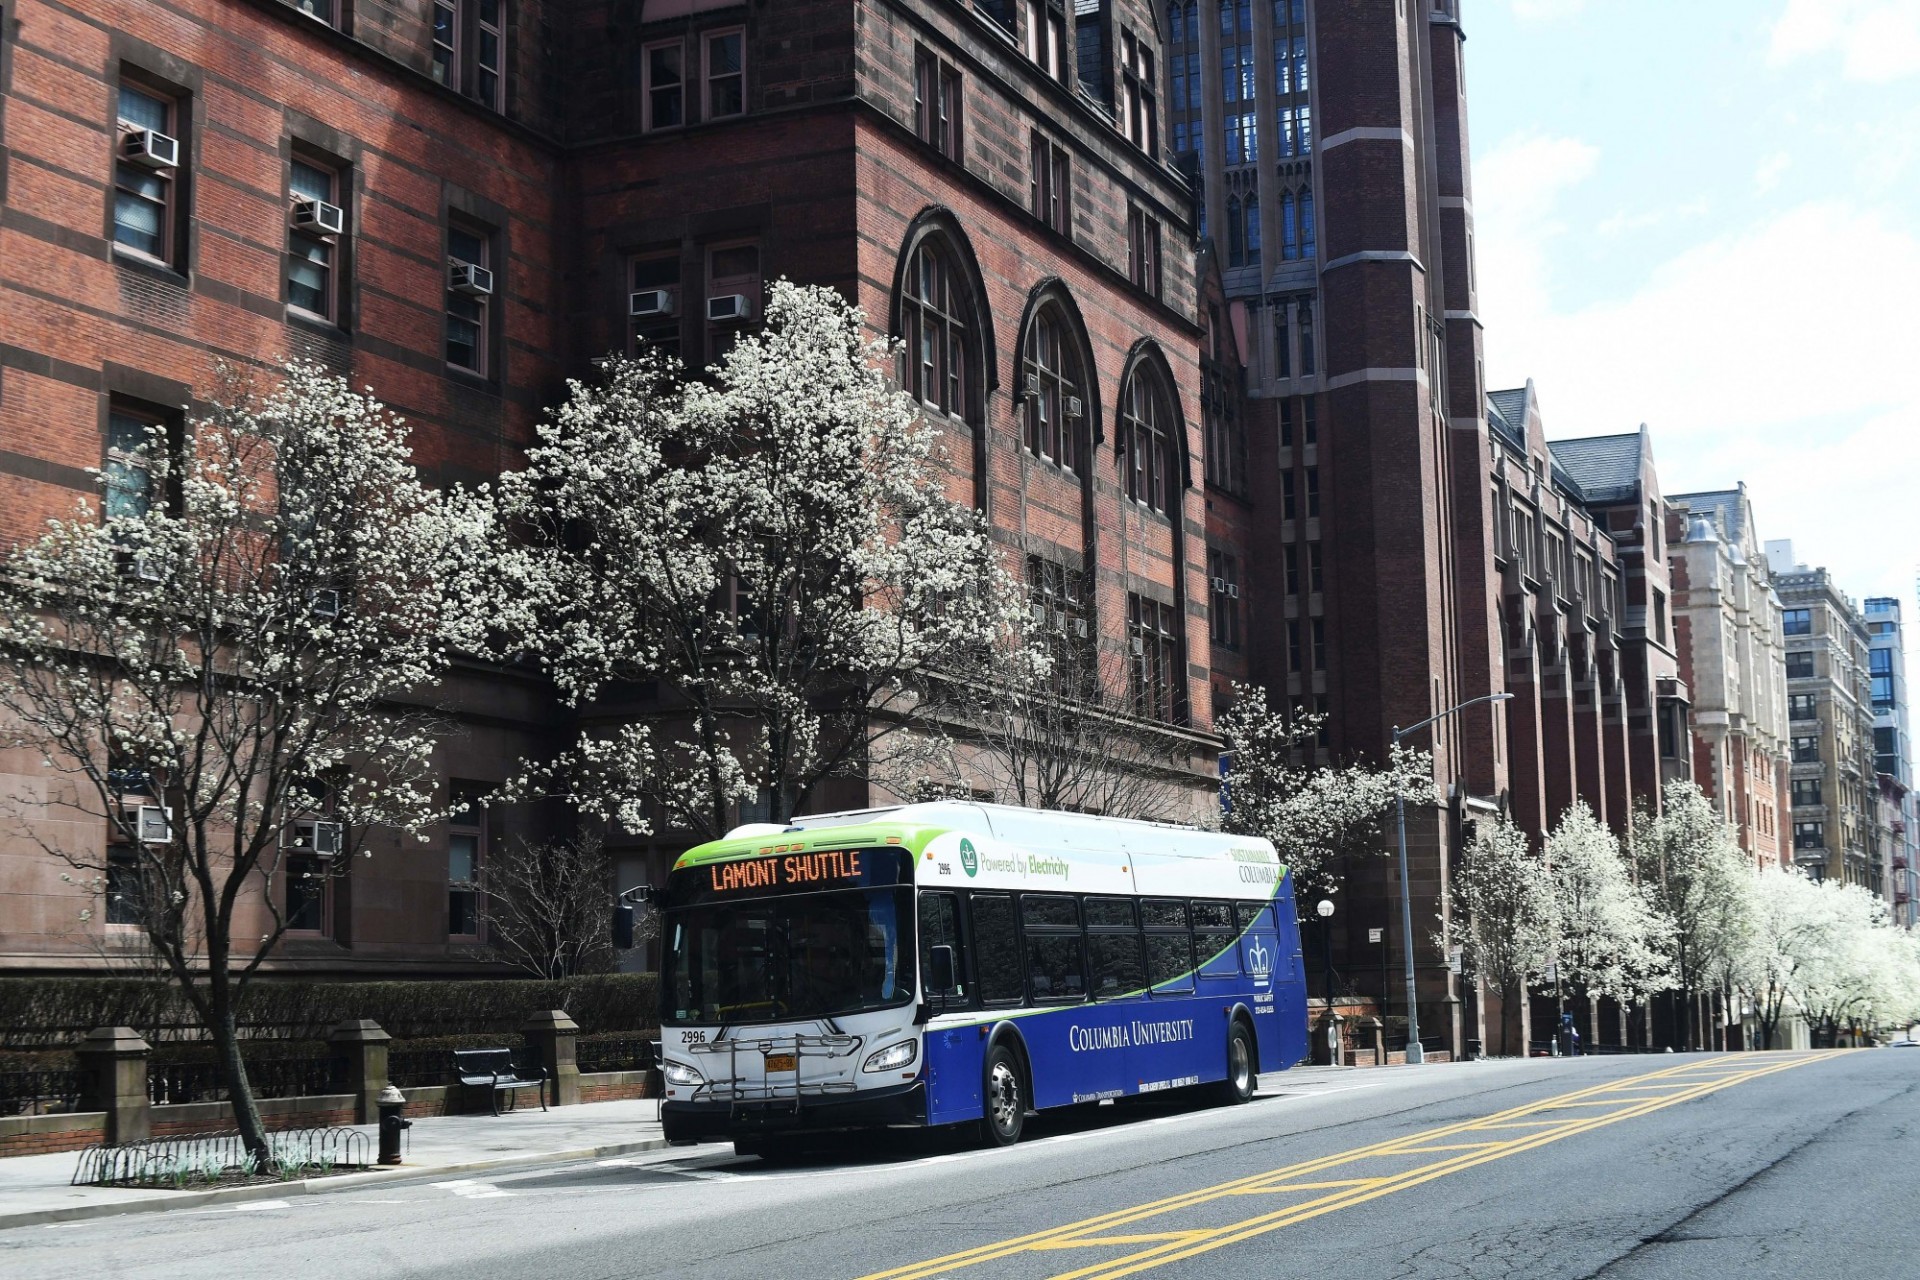 A Columbia shuttle bus is pulled over to the side of the road. Behind the bus are trees in bloom and a red brick building.